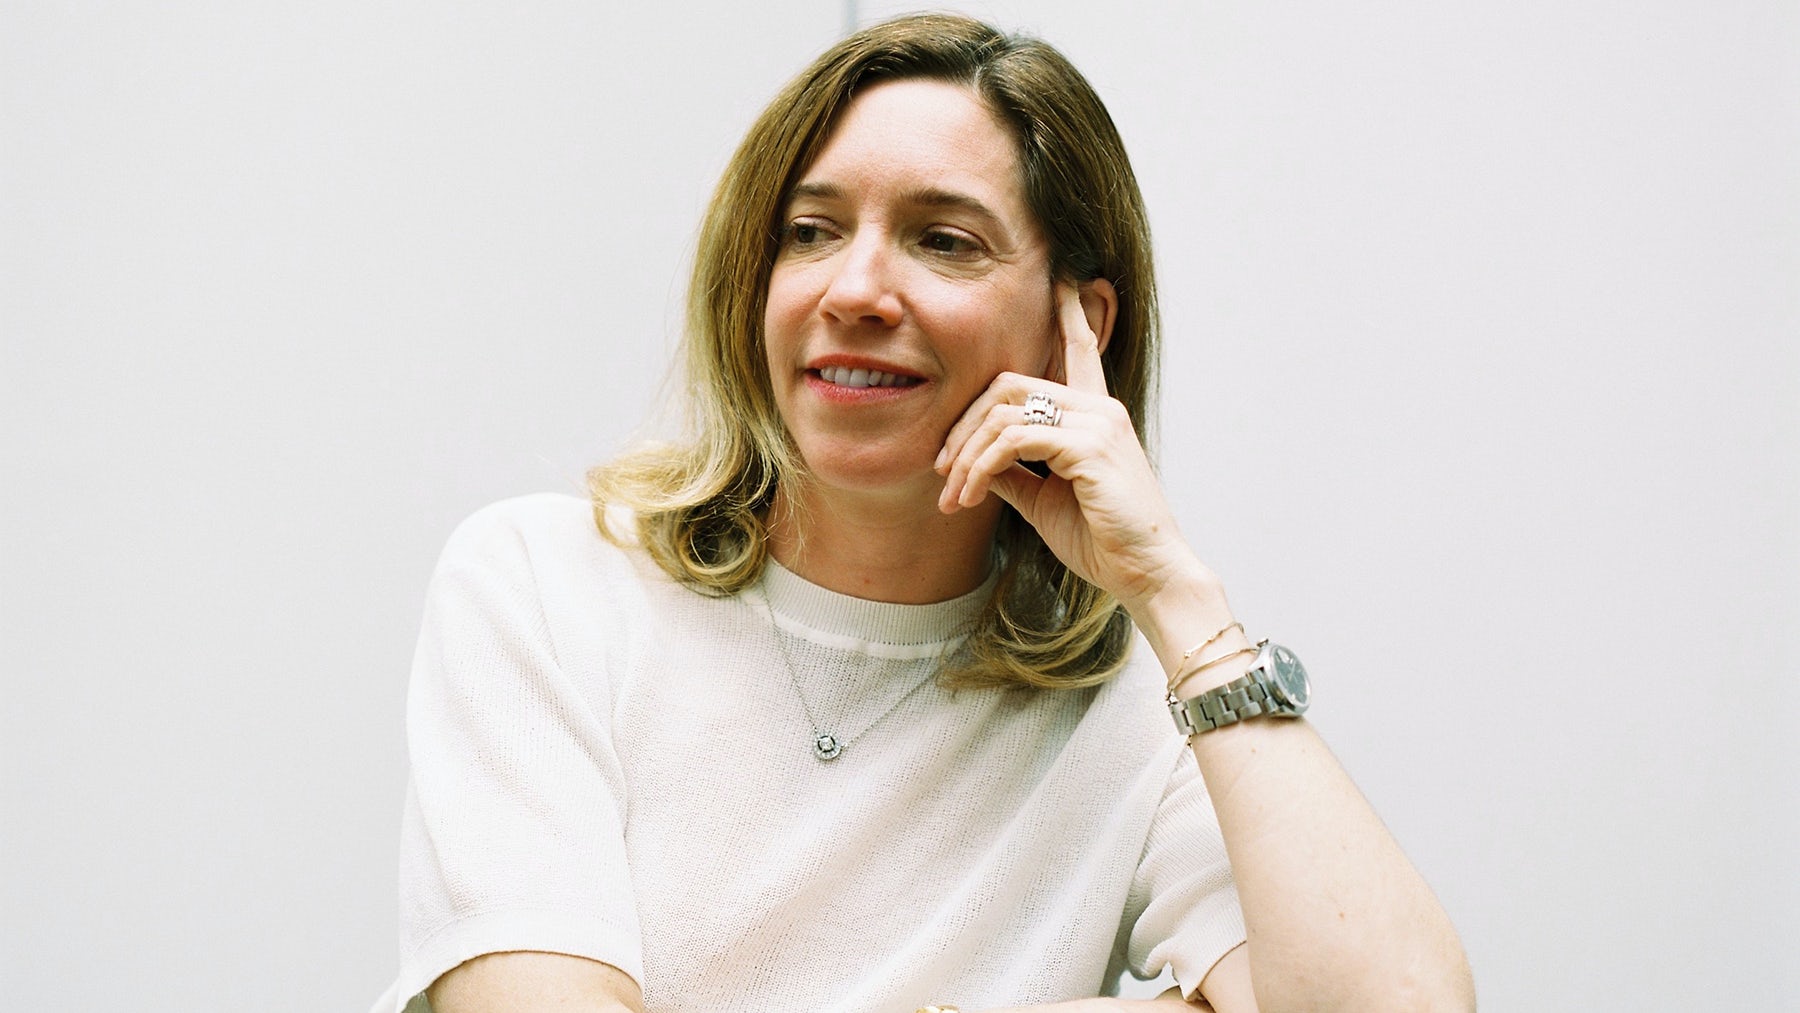 Ydmyge Abe fælde Isabel Marant's Anouck Duranteau-Loeper: Fashion 'Is More Experiential Than  Conceptual' | BoF